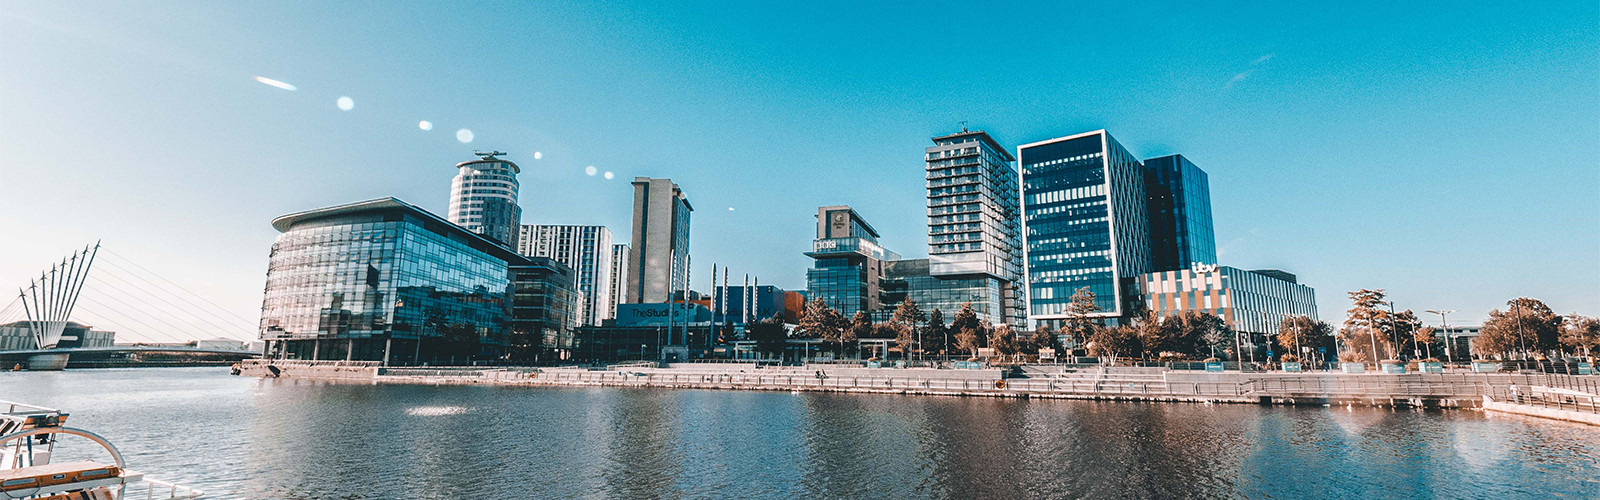 Panoramic Photo of the mediacity area from the other side